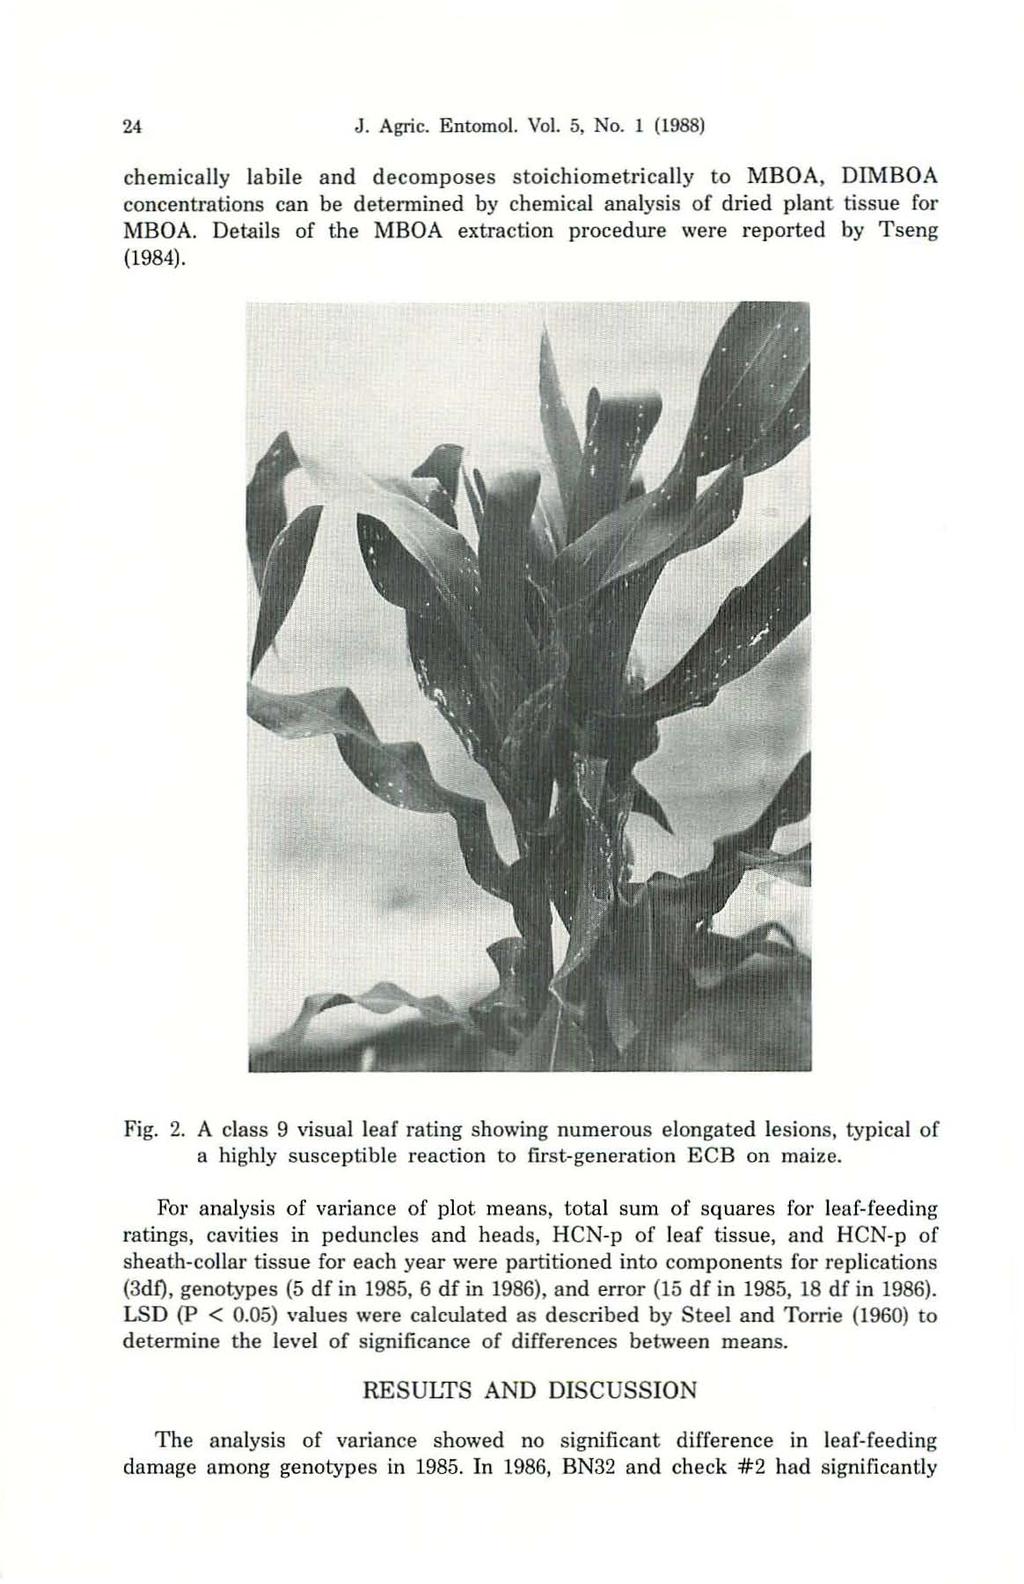 24 J. Agric. Entomol. Vol. 5. No.1 (1988) chemically labile and decomposes stoichiometrically to MBOA, DIM BOA concentrations can be detennined by chemical analysis of dried plant tissue for MBOA.